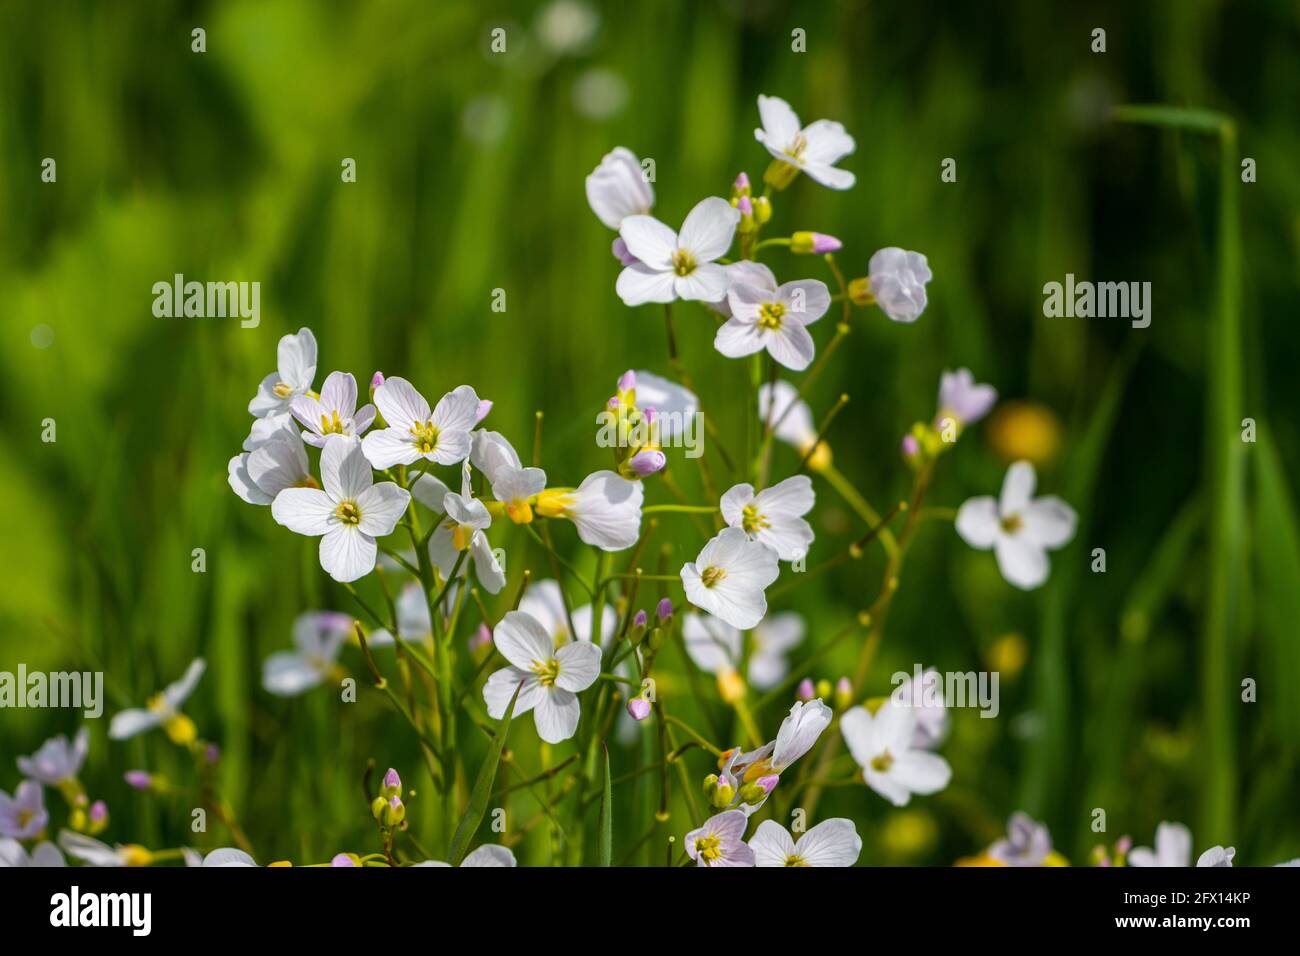 The beautiful Cuckoo flowers in spring with the white and light purple petals, region of Twente and province of Overijssel, the Netherlands Stock Photo